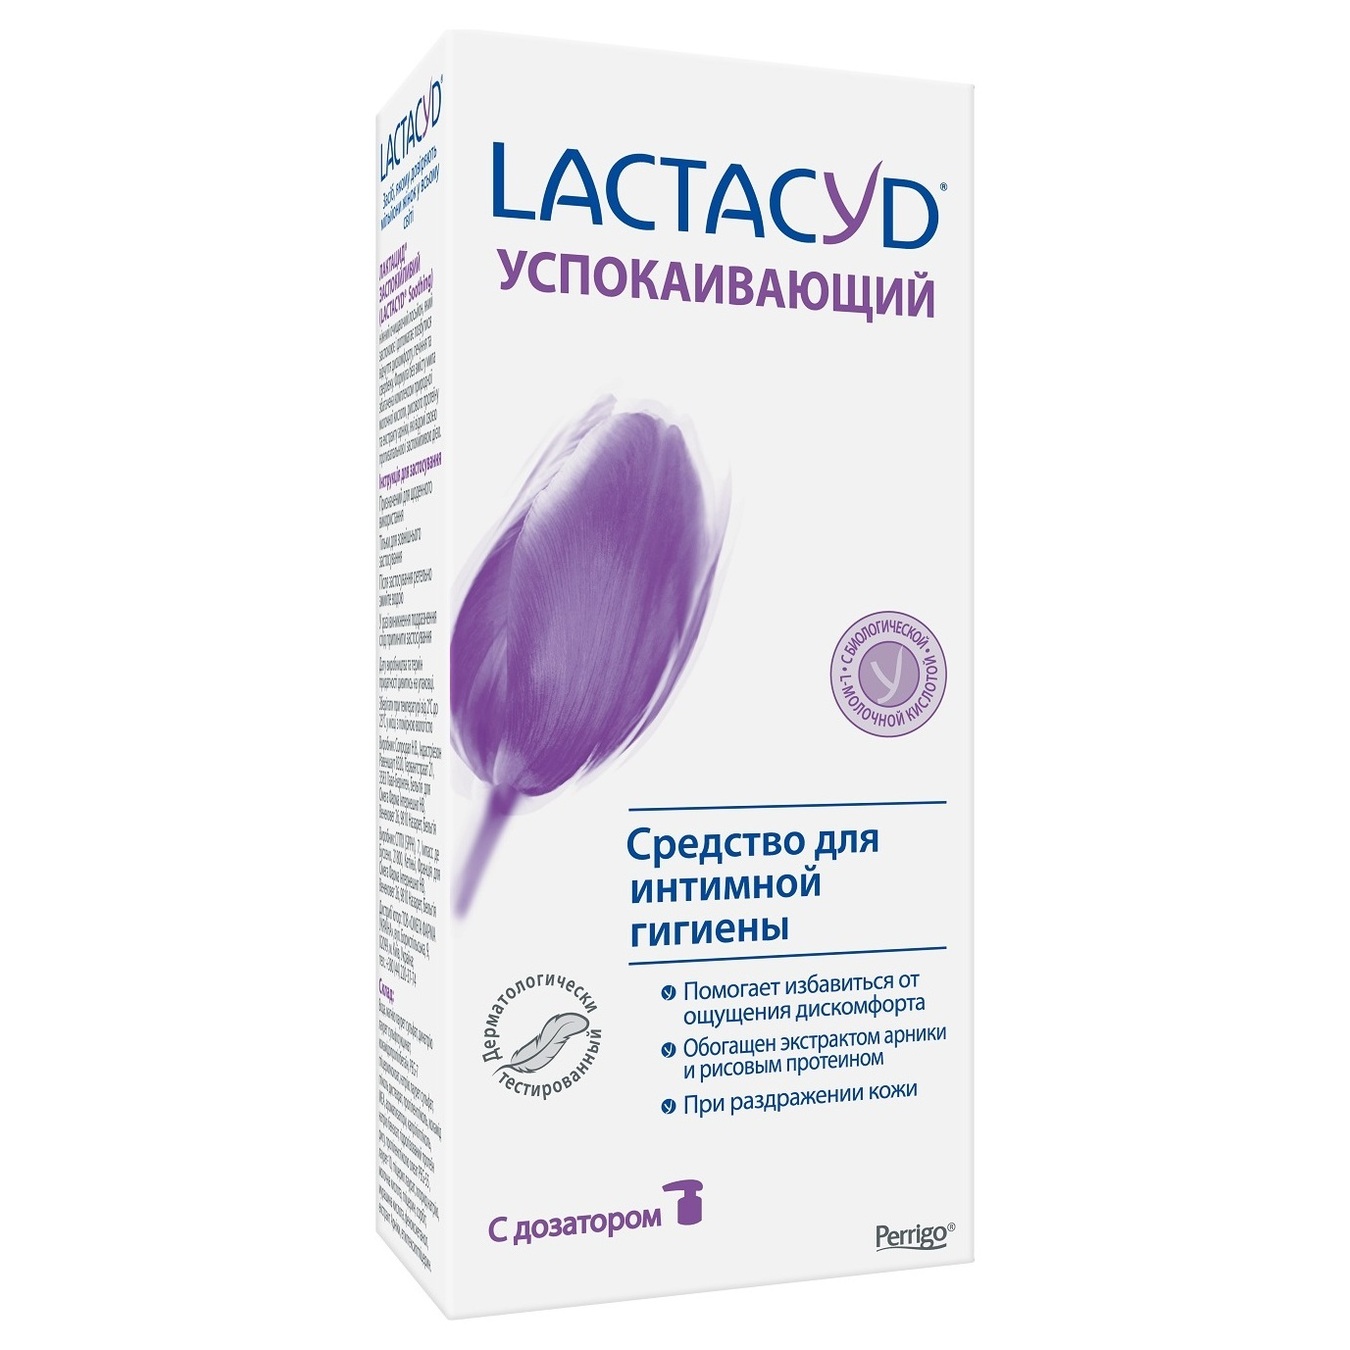 Lactacyd Soothing With Dispenser For Intimate Hygiene Gel 200ml 2